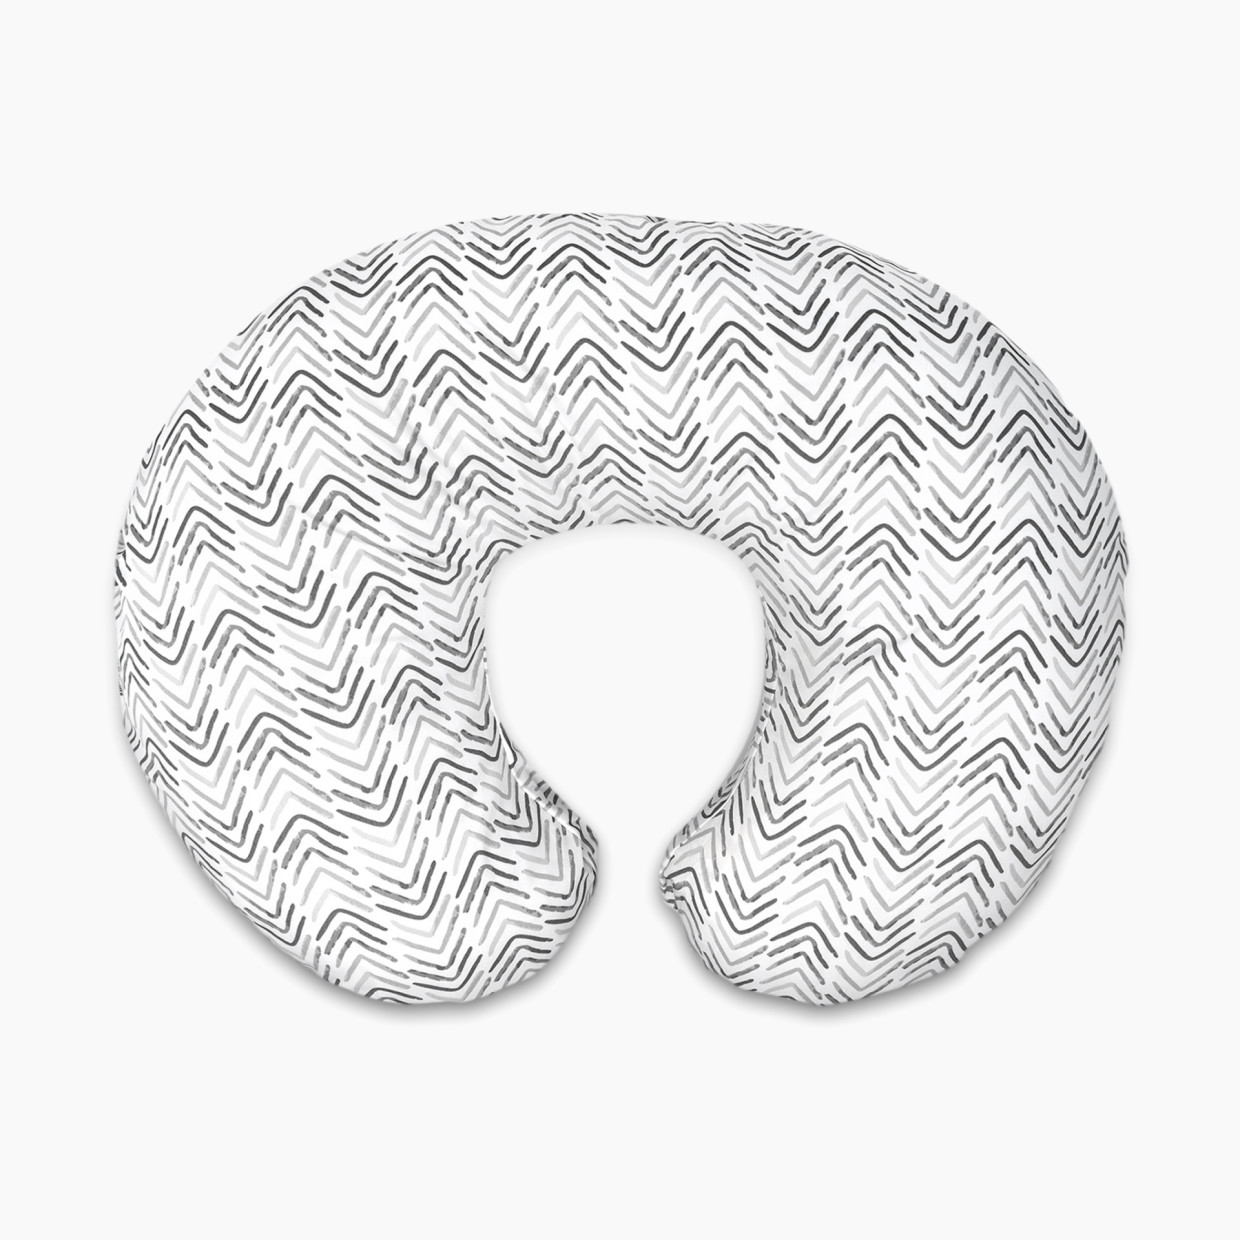 Boppy Original Support Nursing Pillow - Gray Cable Stiches.